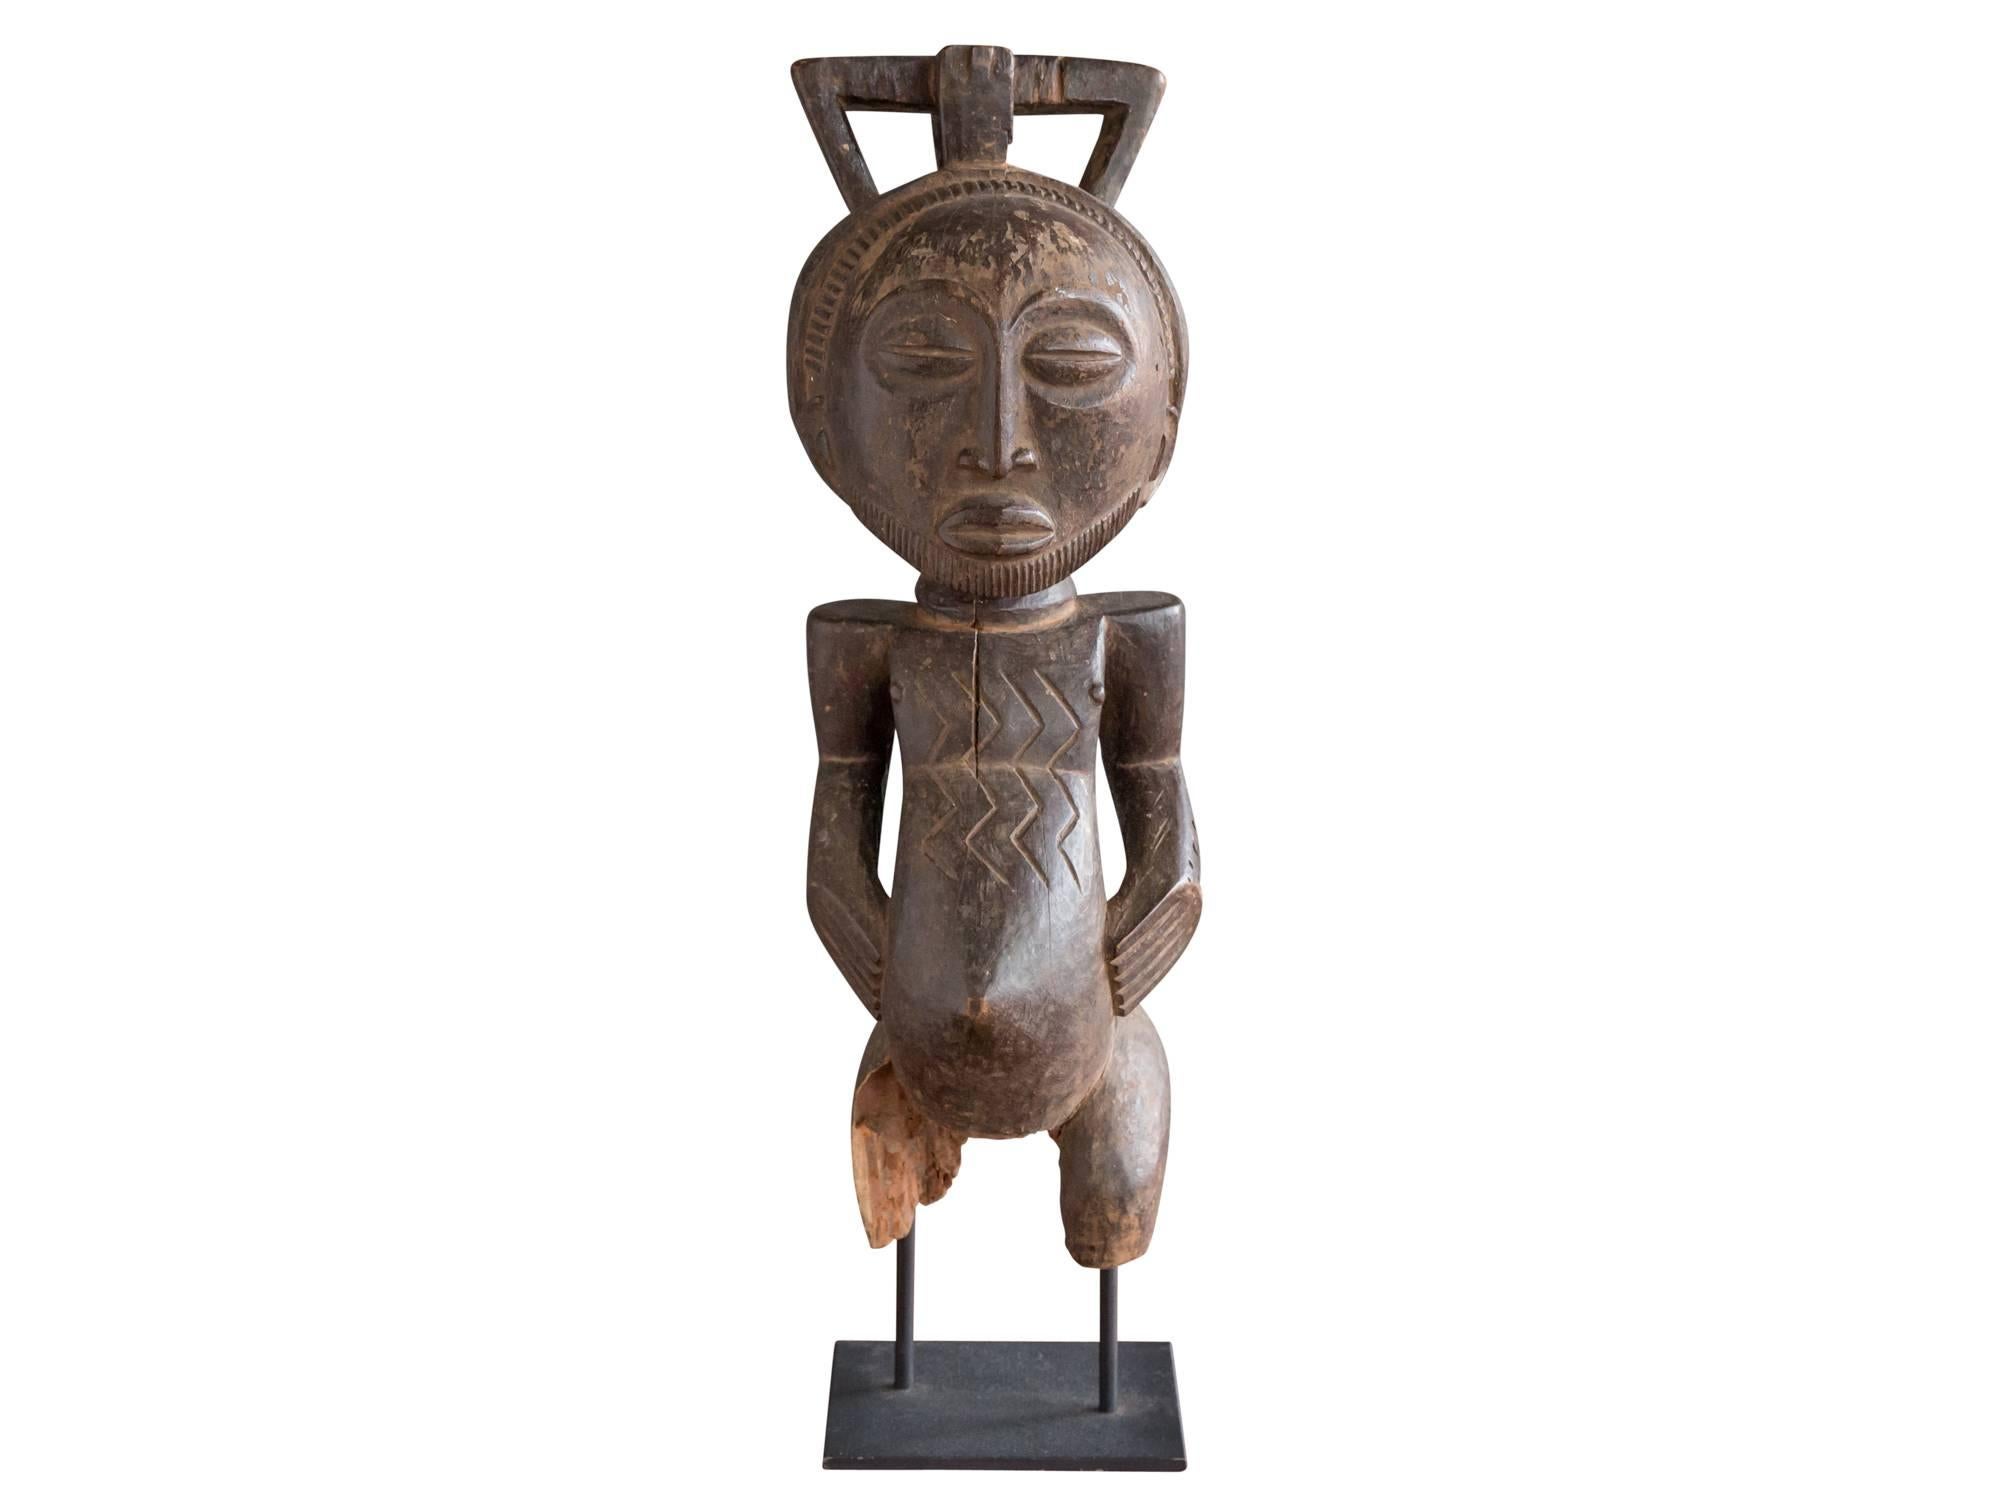 A hand-carved wood singiti or ancestor figure from the Hemba people, Democratic Republic of Congo. Most likely from the mid-20th century. Featuring a sensitively rendered face with serene expression and grooved beard. Pierced, four-lobed hairstyle